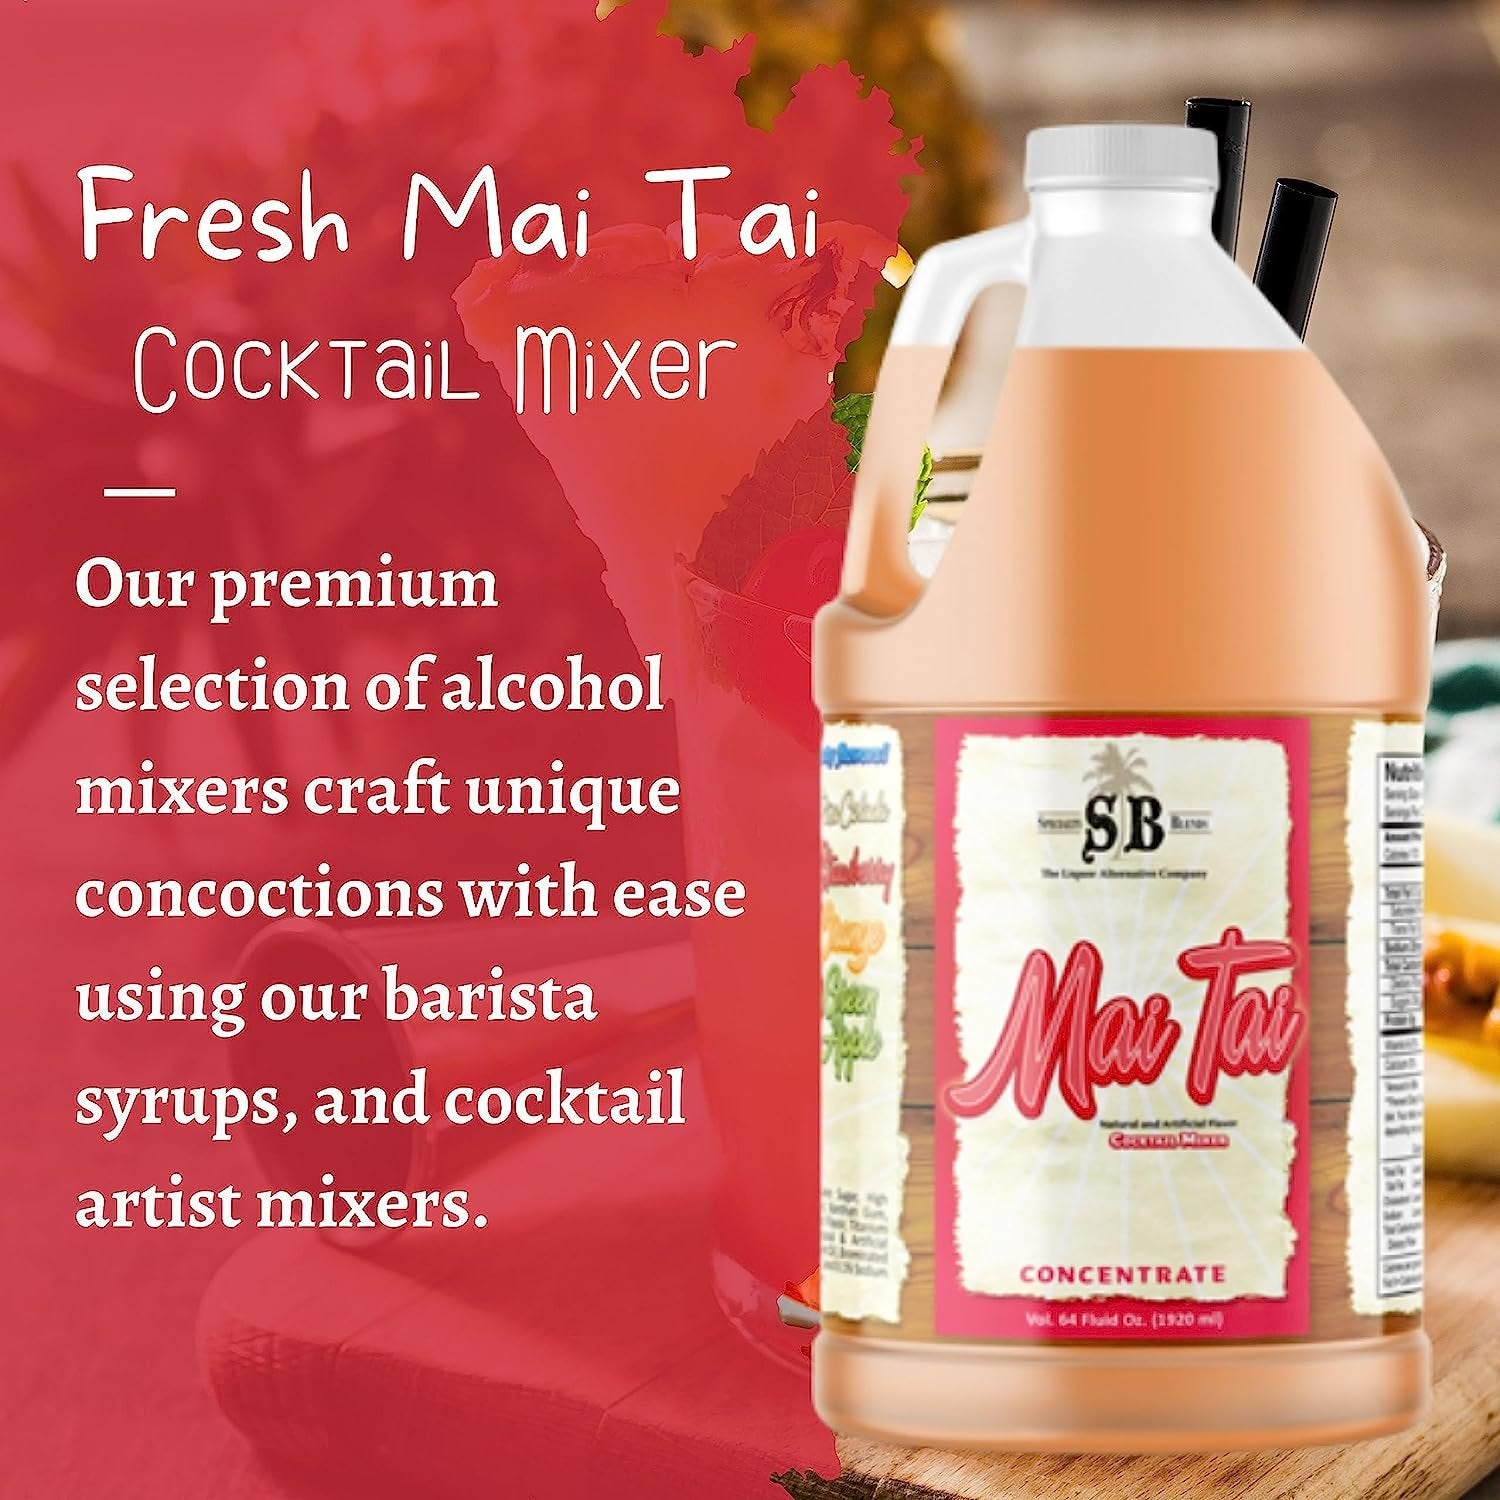 Specialty Blends Mai Tai Flavored Syrup Cocktail Mixer Concentrate, Made with Organic Mai Tai Flavor Syrups For Drinks, 1/2 Gallon (Pack of 1) - with Bonus Worldwide Nutrition Multi Purpose Key Chain